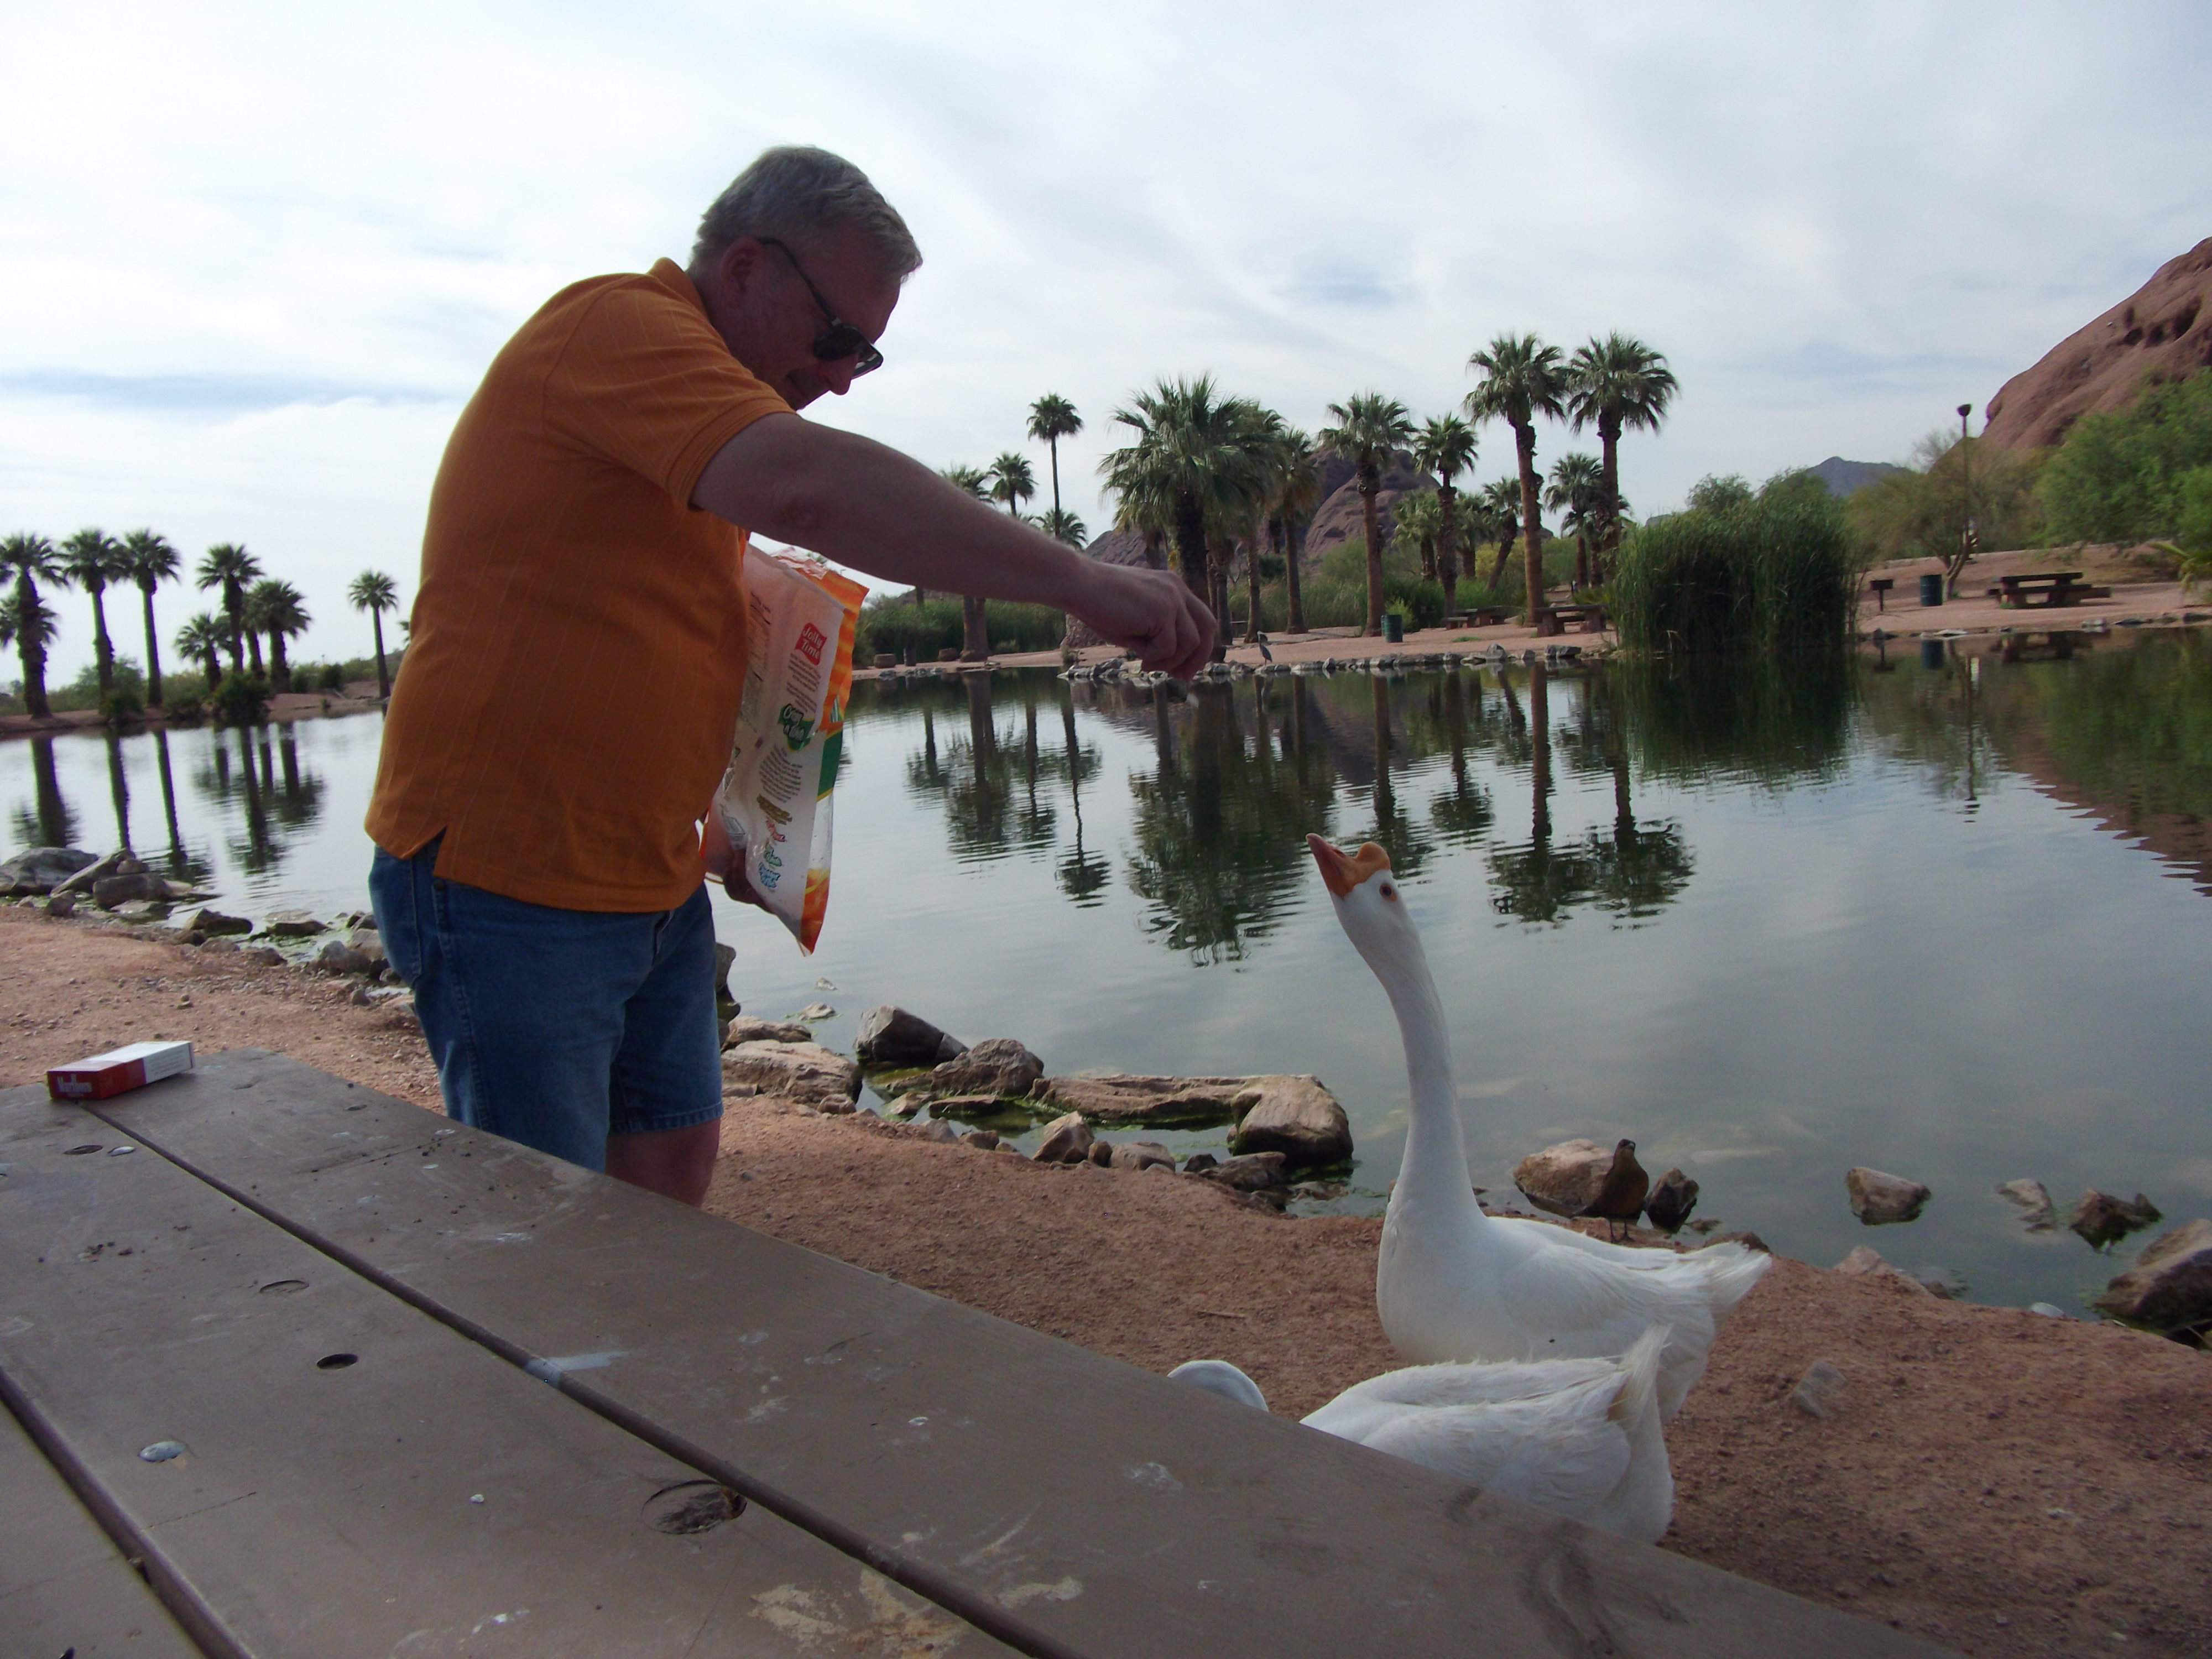 Dennsi feeds the geese in Papago Park